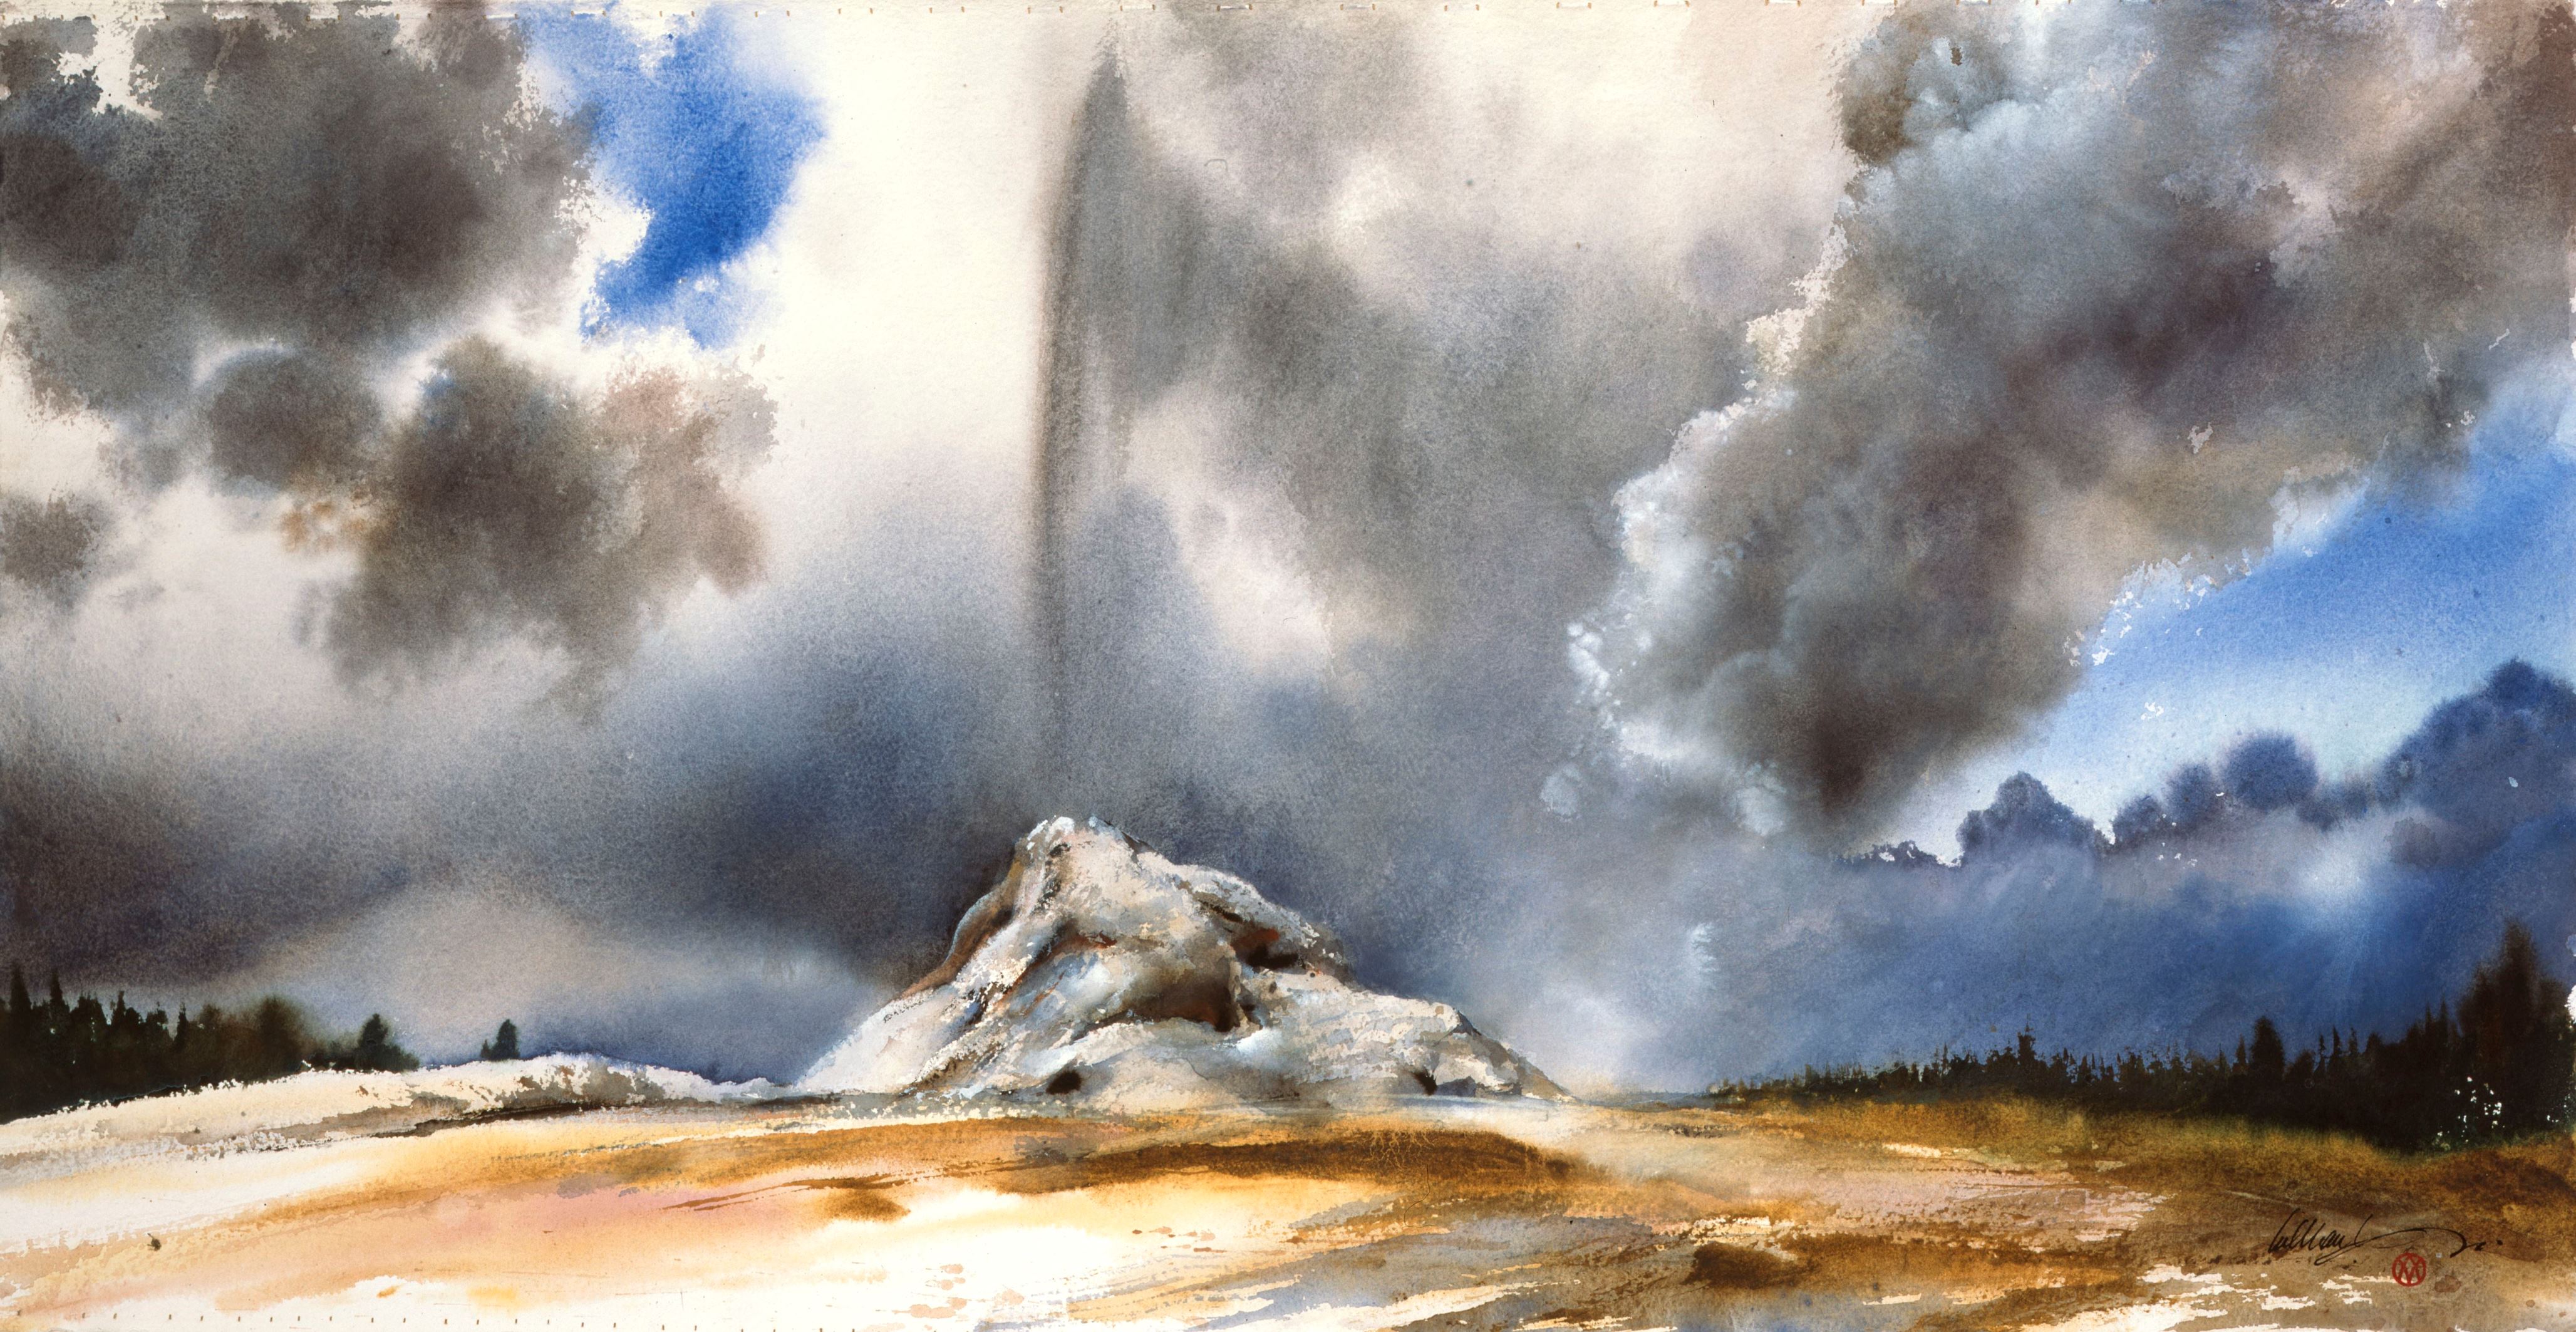 William Matthews (b. 1949) Thermal Spigot, Yellowstone, 1998. Watercolor on paper. Buffalo Bill Center of the West, Cody, Wyoming, USA. Gift of the Jeannette and H. Peter Kriendler Charitable Trust. 7